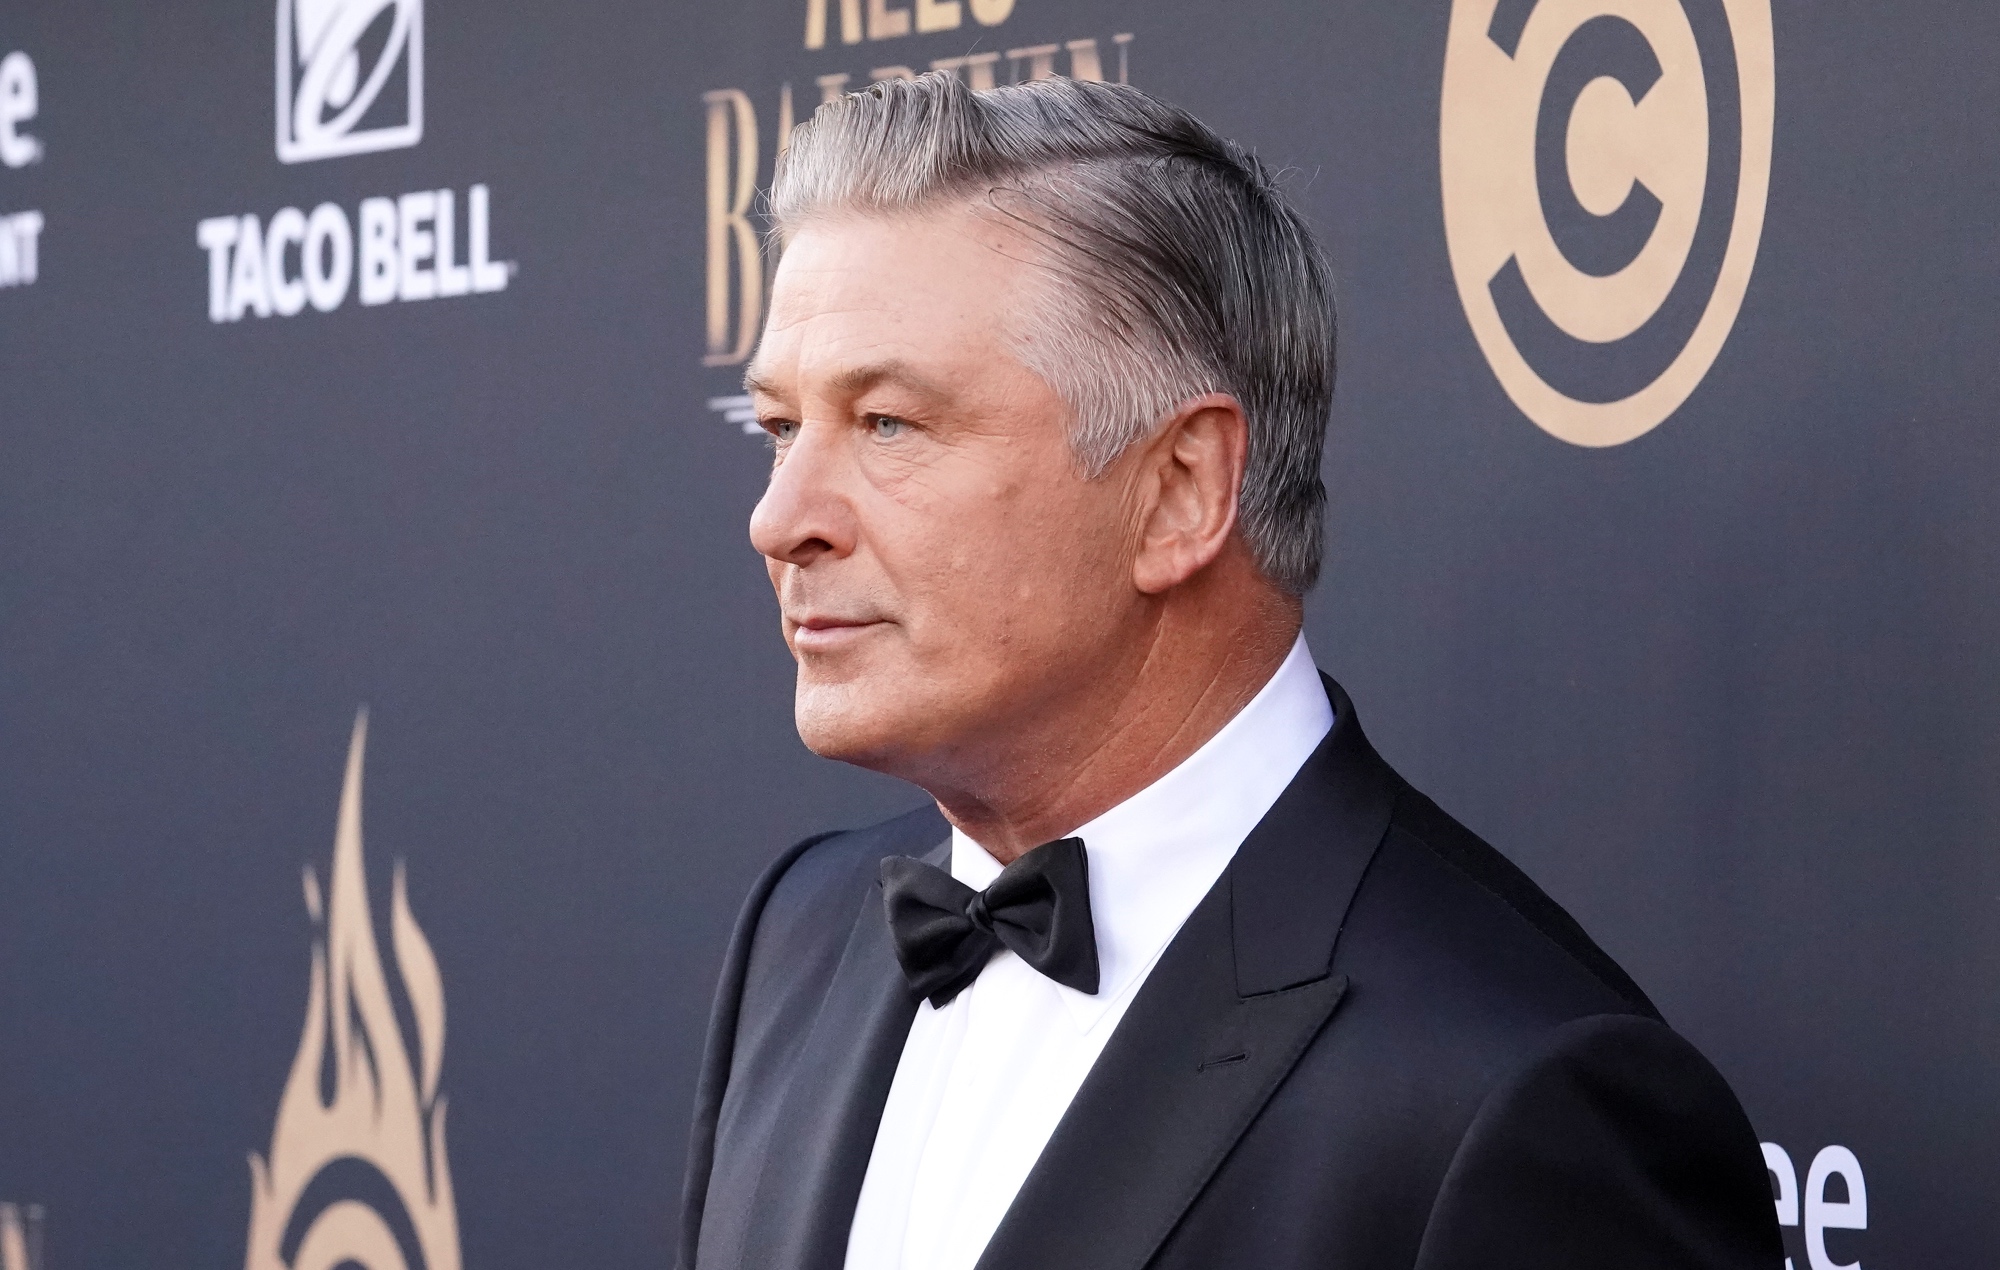 Alec Baldwin told gun was safe before fatal shooting, according to court records